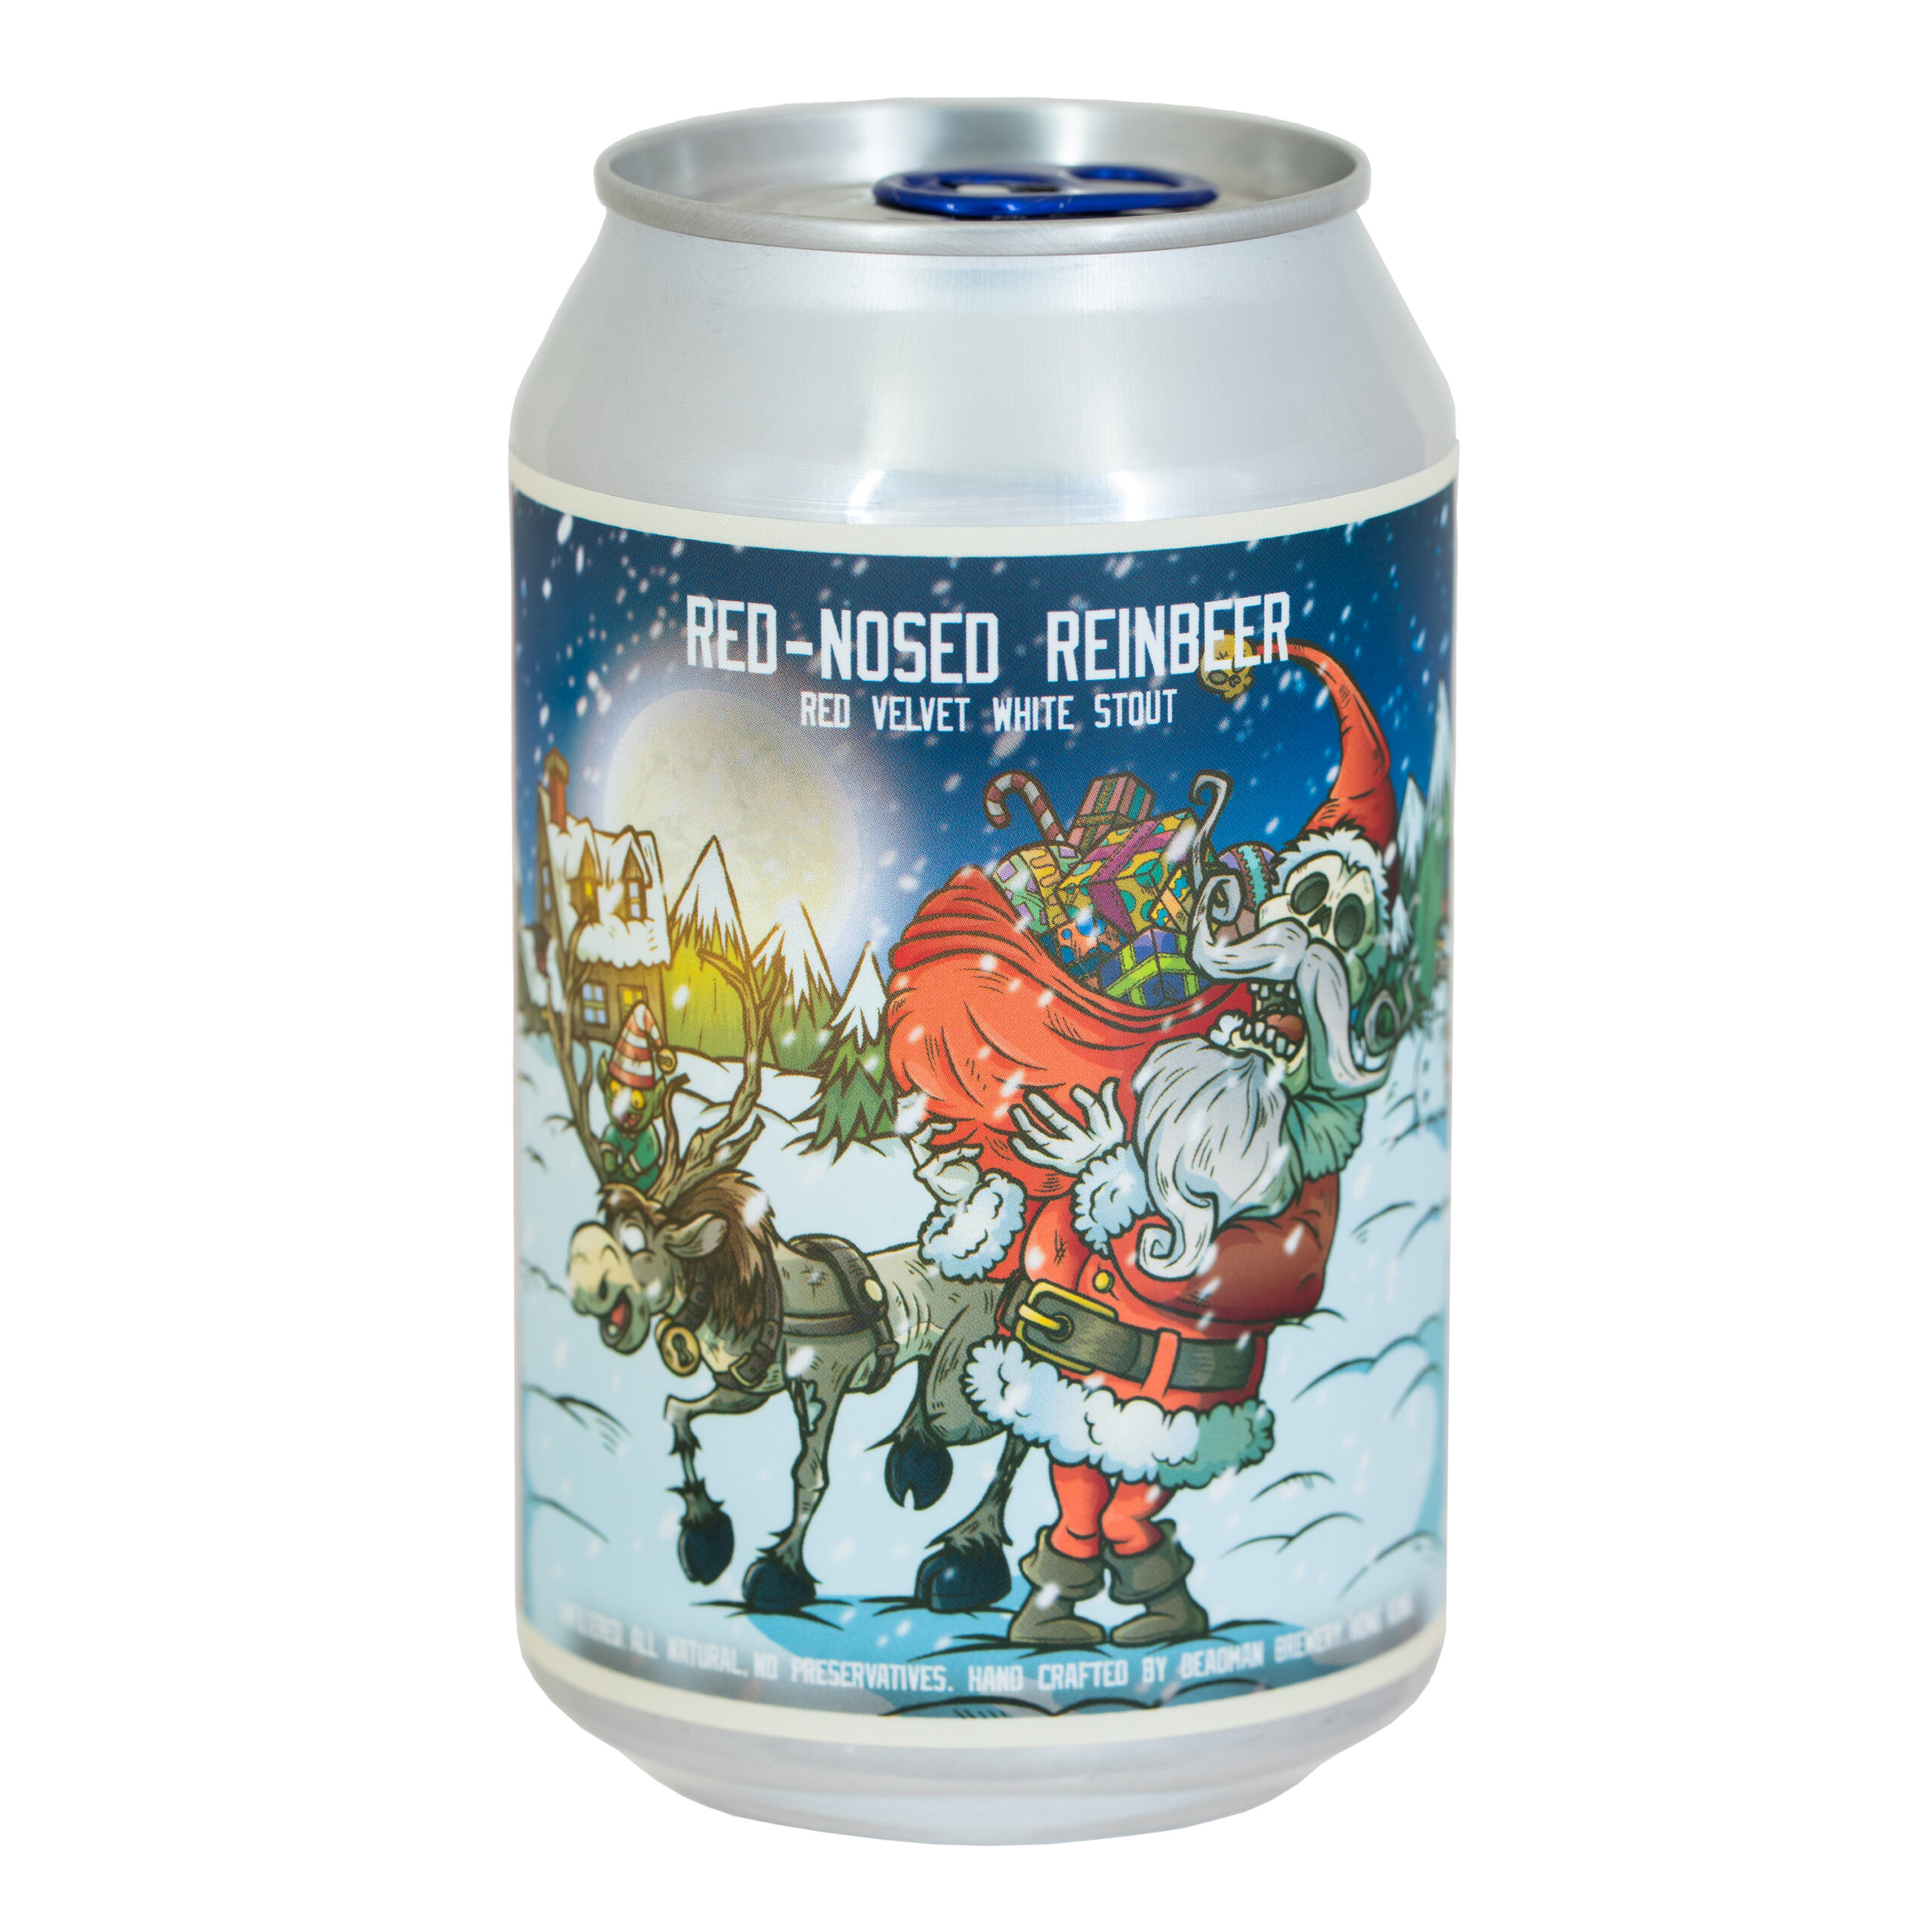 Red-Nosed Reinbeer (Full Case – 24 Cans)